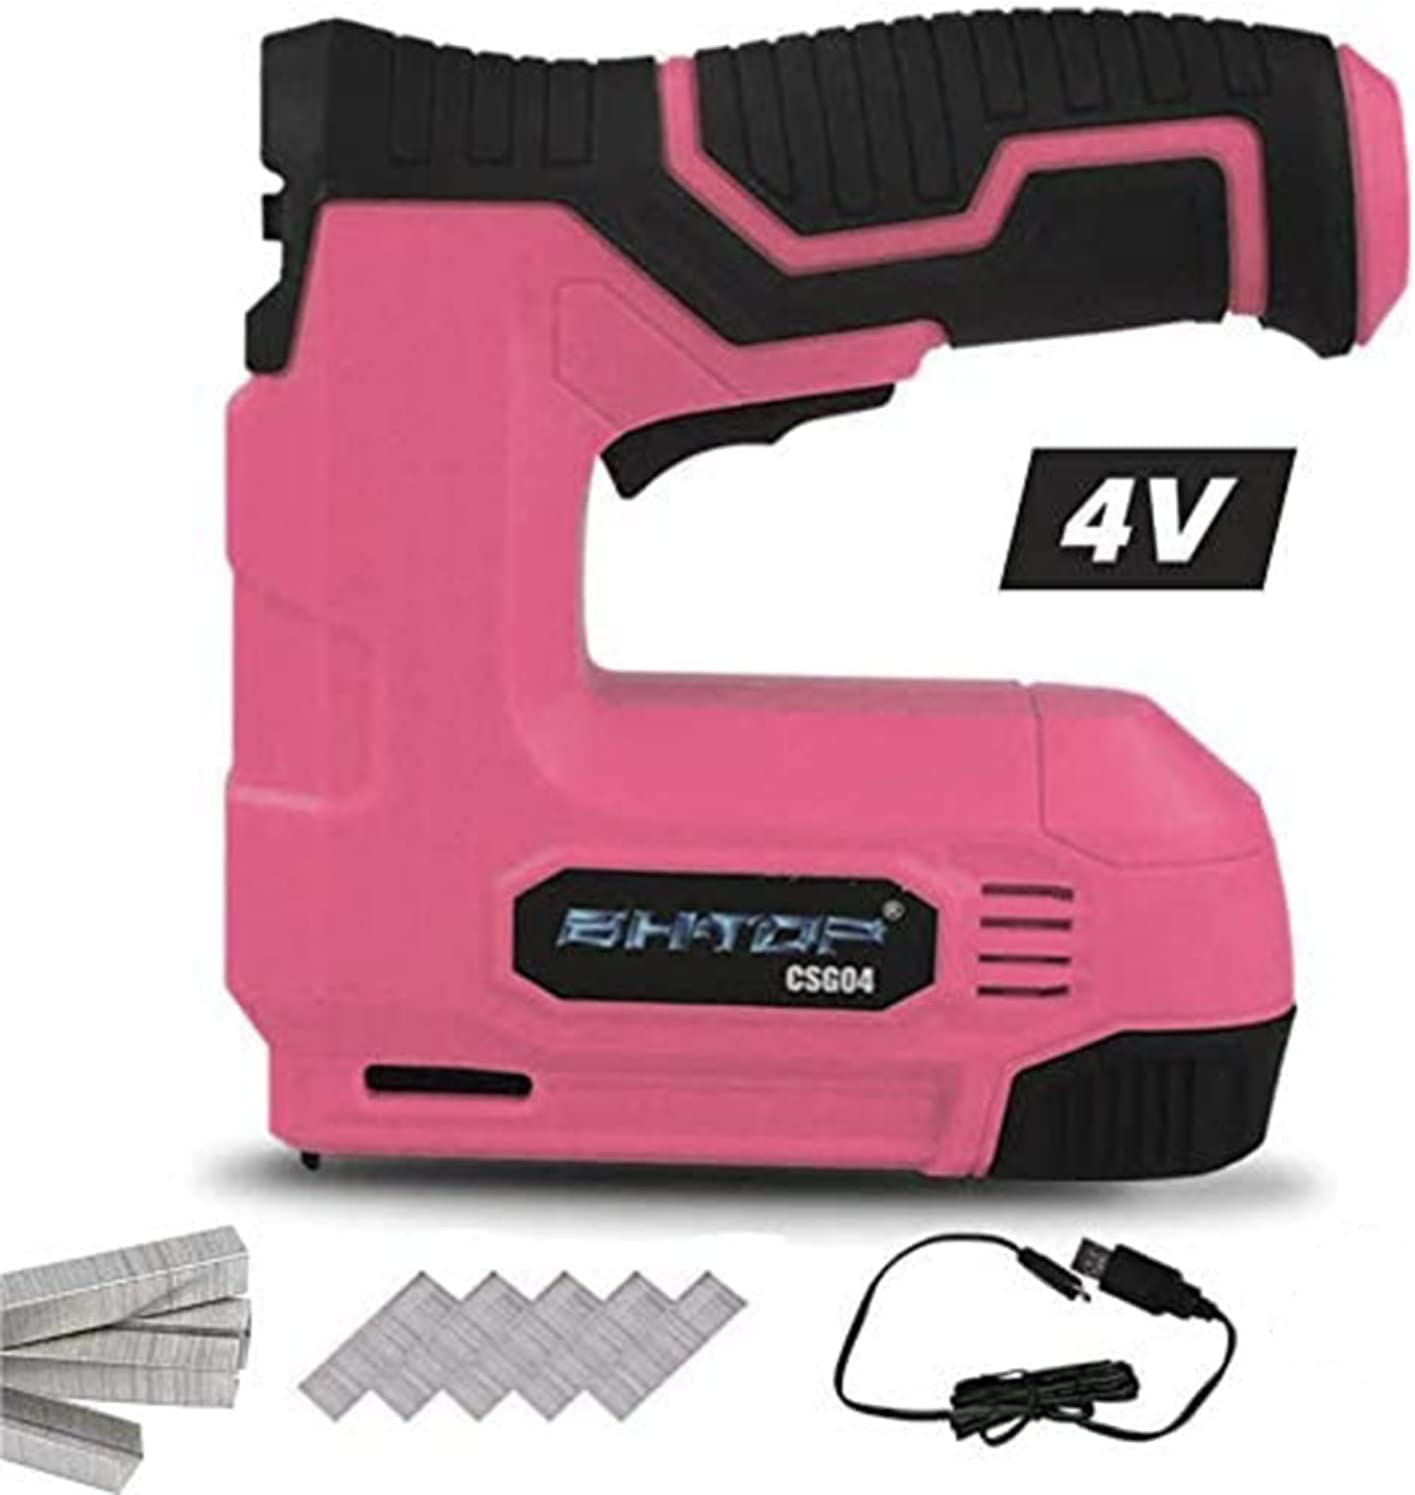 11 Best Electric Staple Guns For DIY Projects In 2023